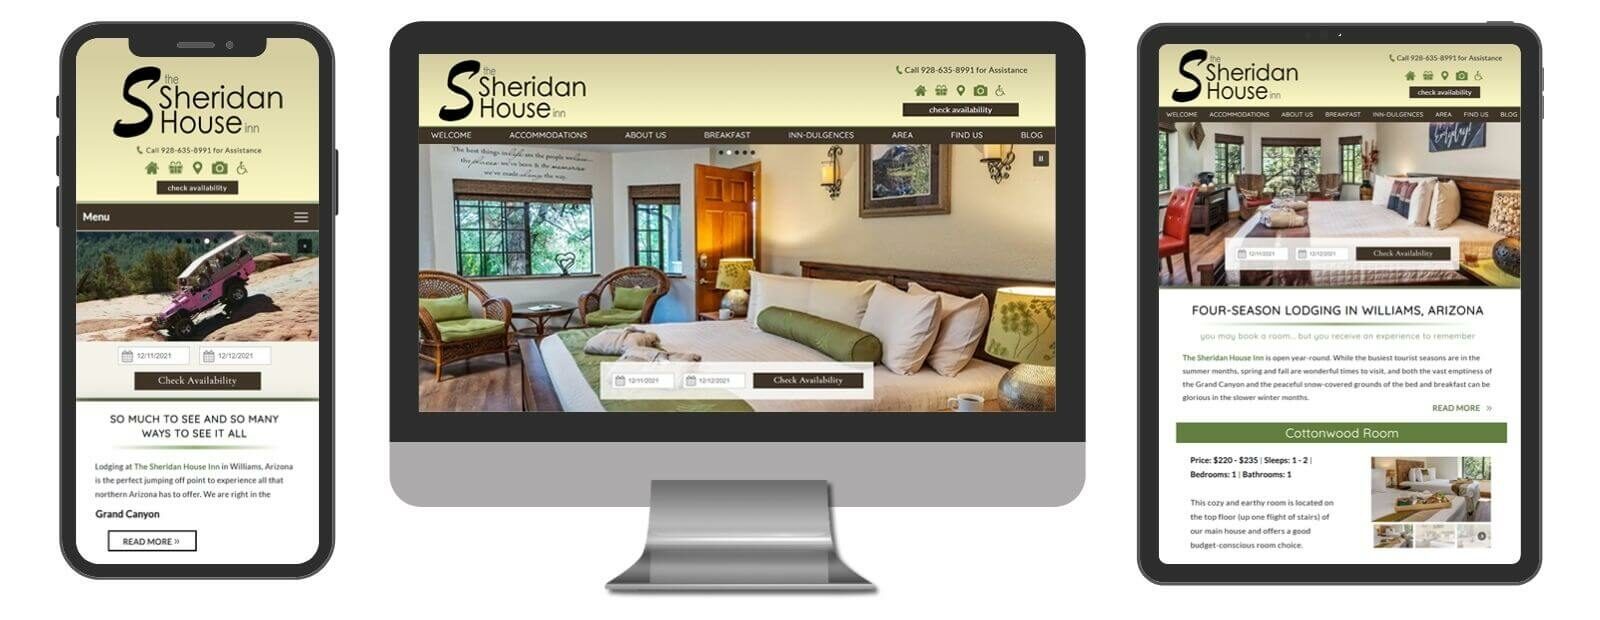 The Sheridan House Inn website displayed in 3 sizes - mobile, template and desktop